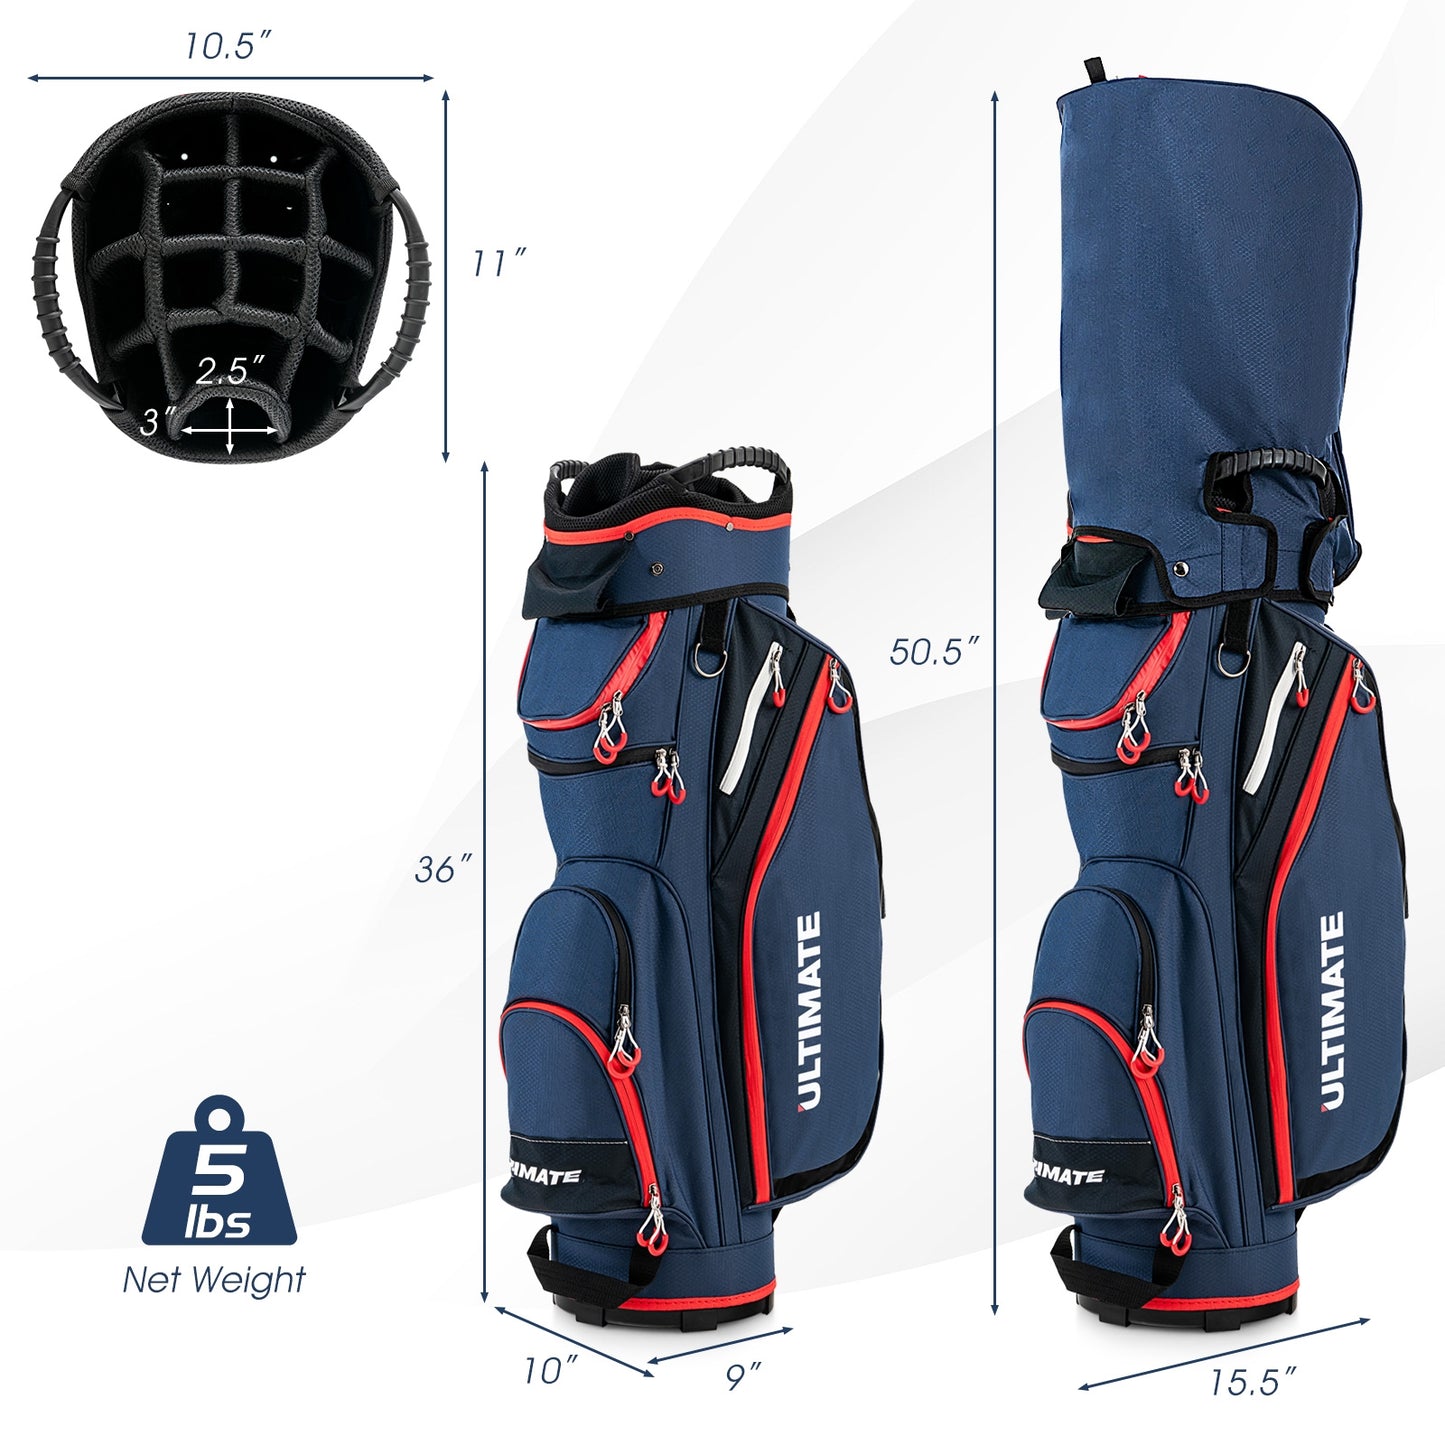 Lightweight and Large Capacity Golf Stand Bag-Navy